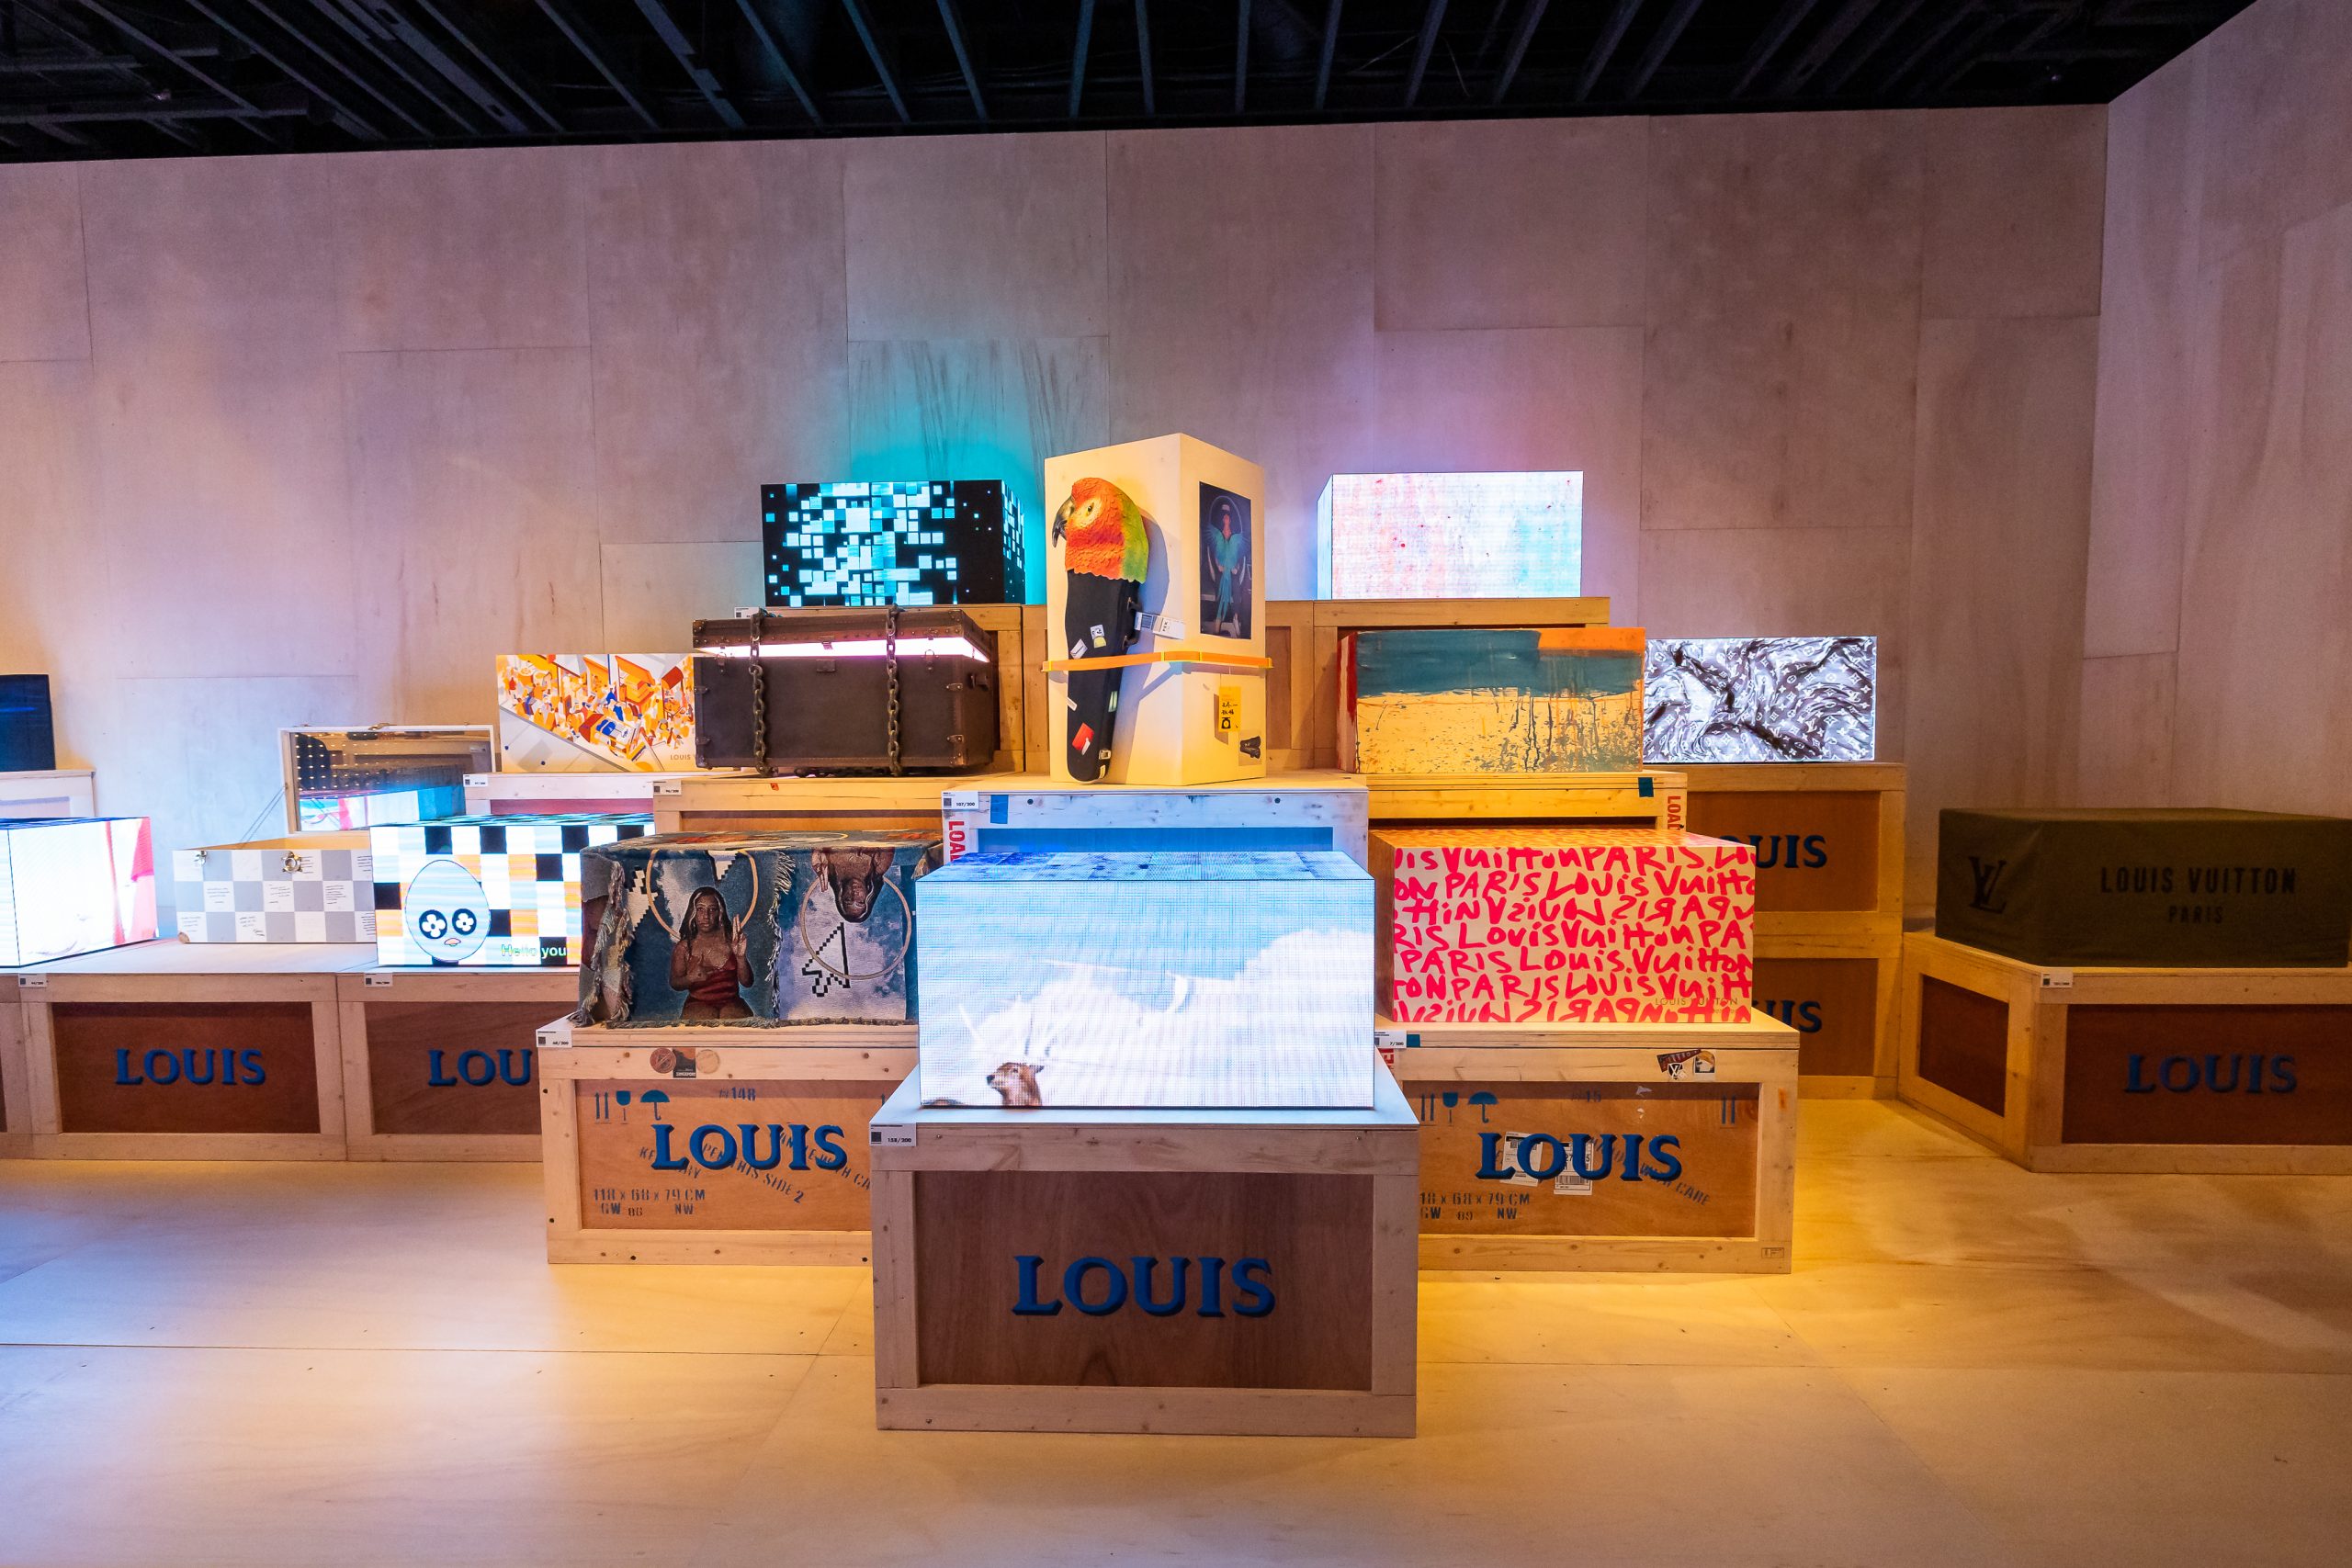 Louis Vuitton takeover at Harrods 2023, inspired by the LV and